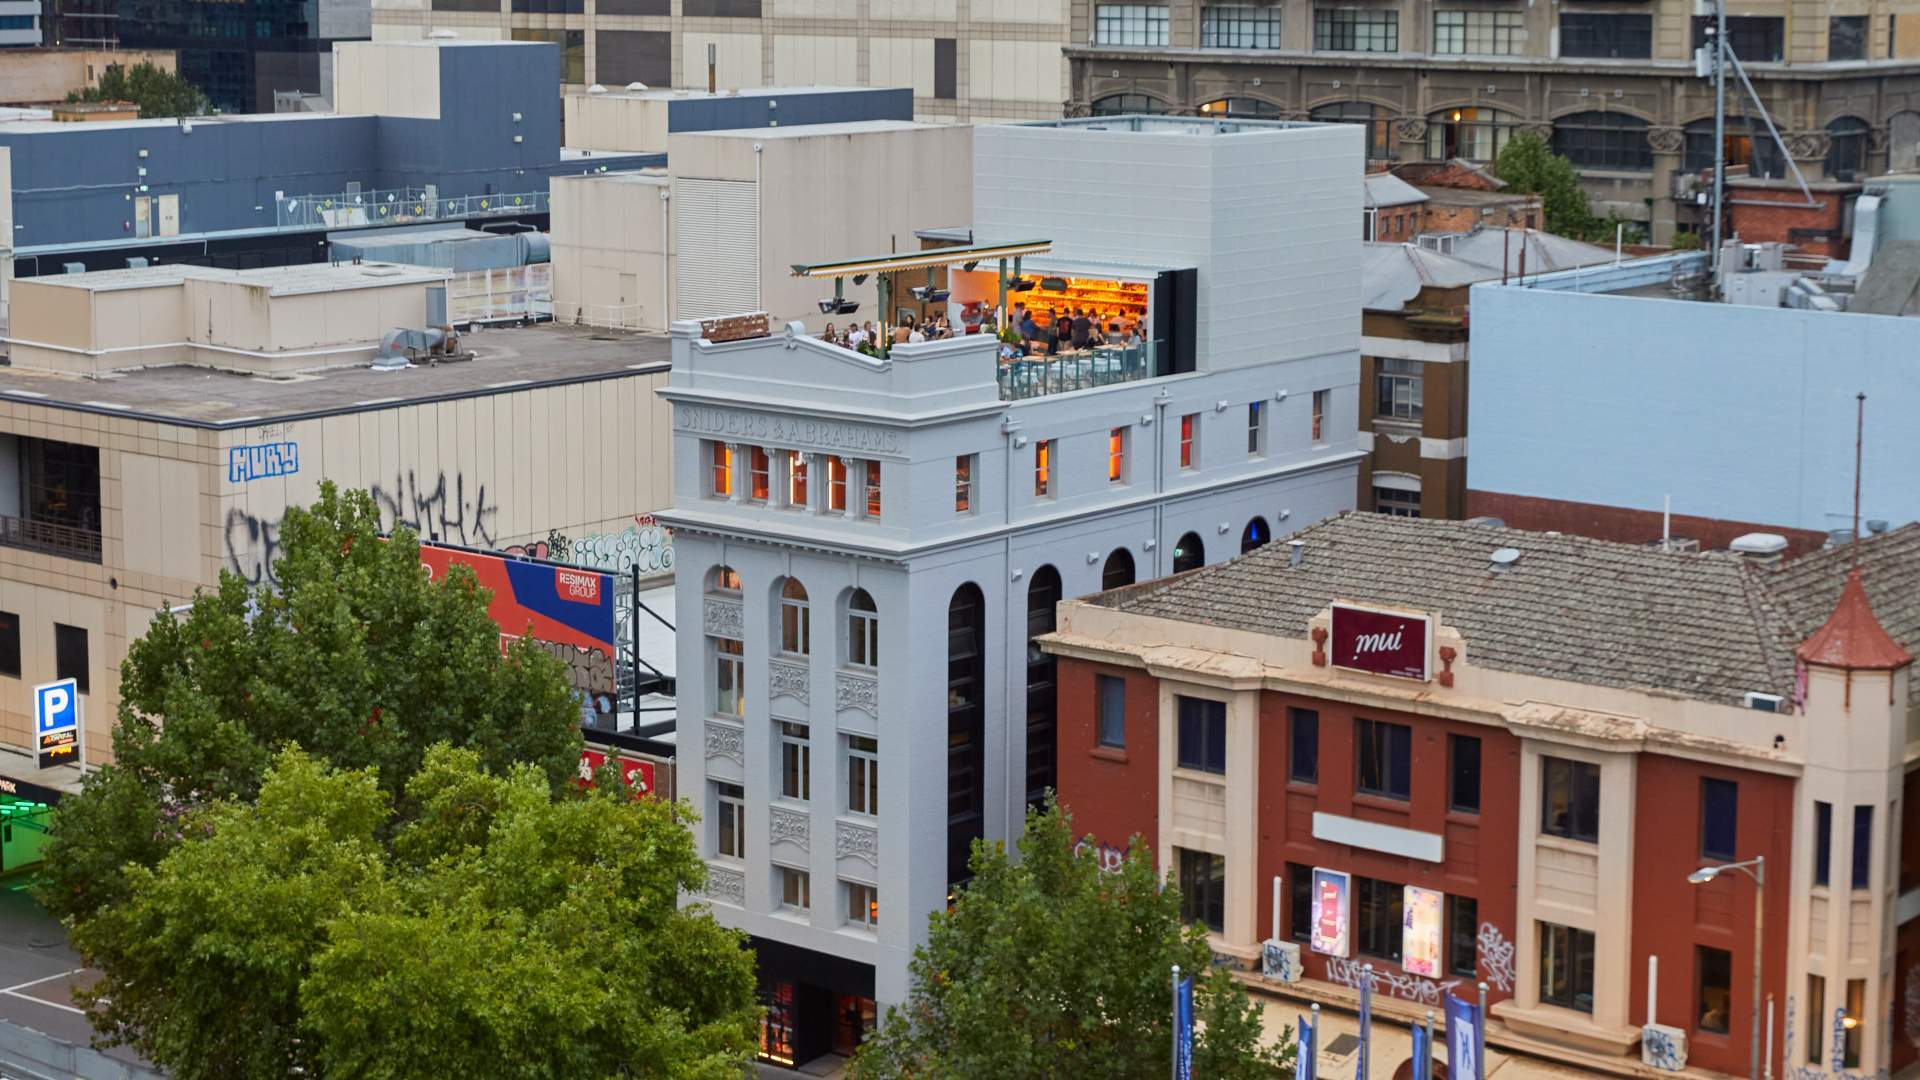 A Garden Party-Inspired Rooftop Bar Is the Crowning Glory of the Newly Launched HER Building